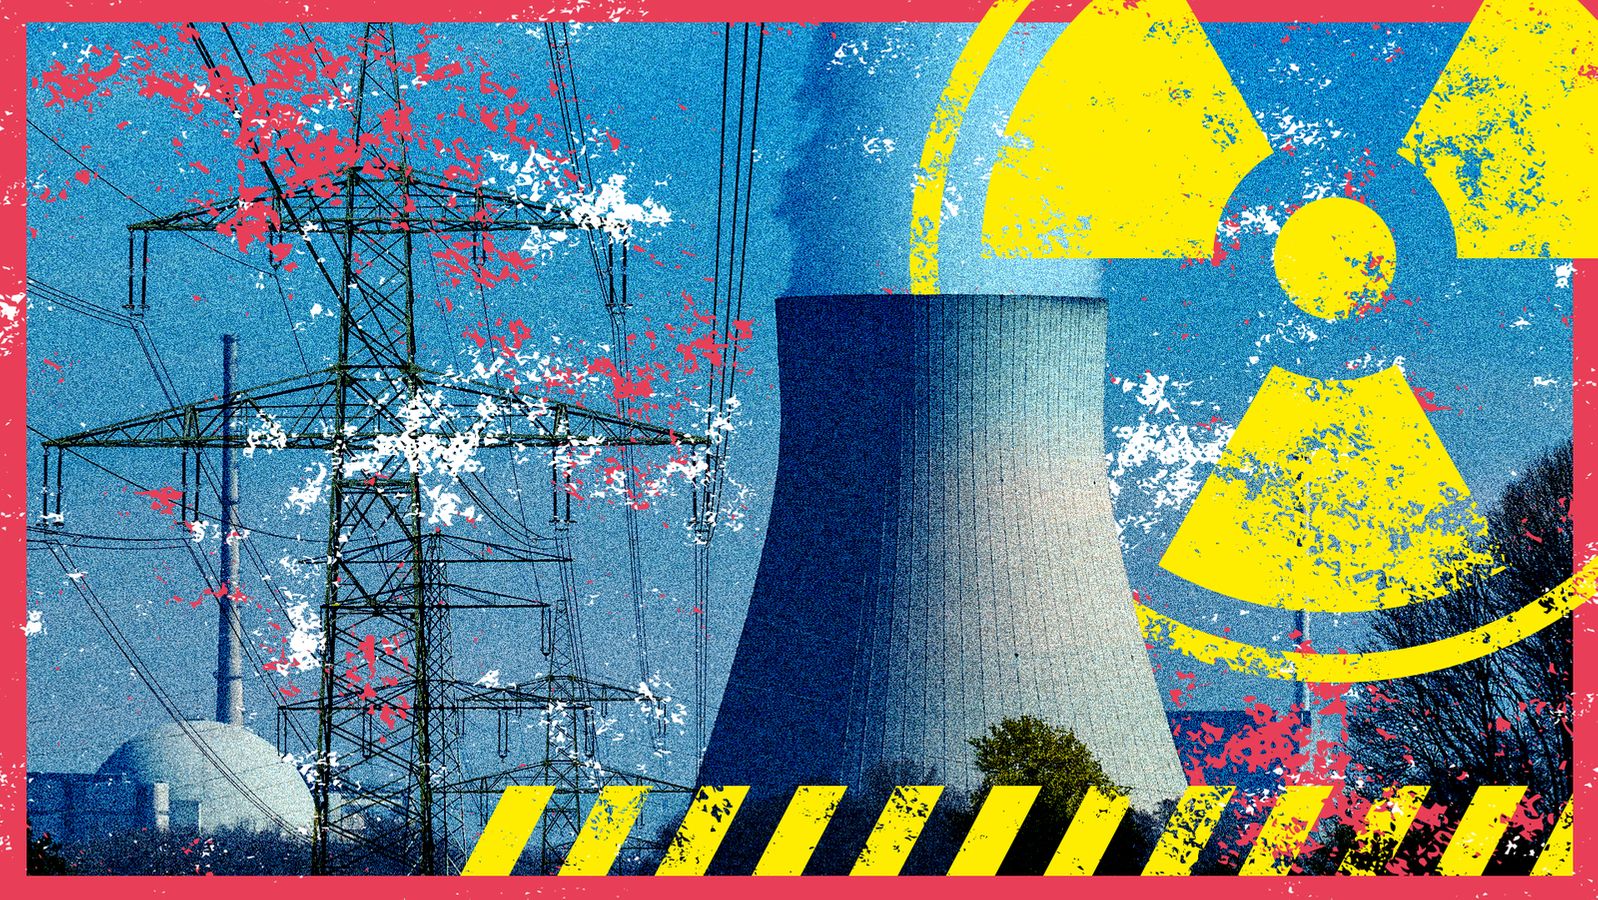 Energy crisis, climate, gas emergency: Can nuclear energy help us?